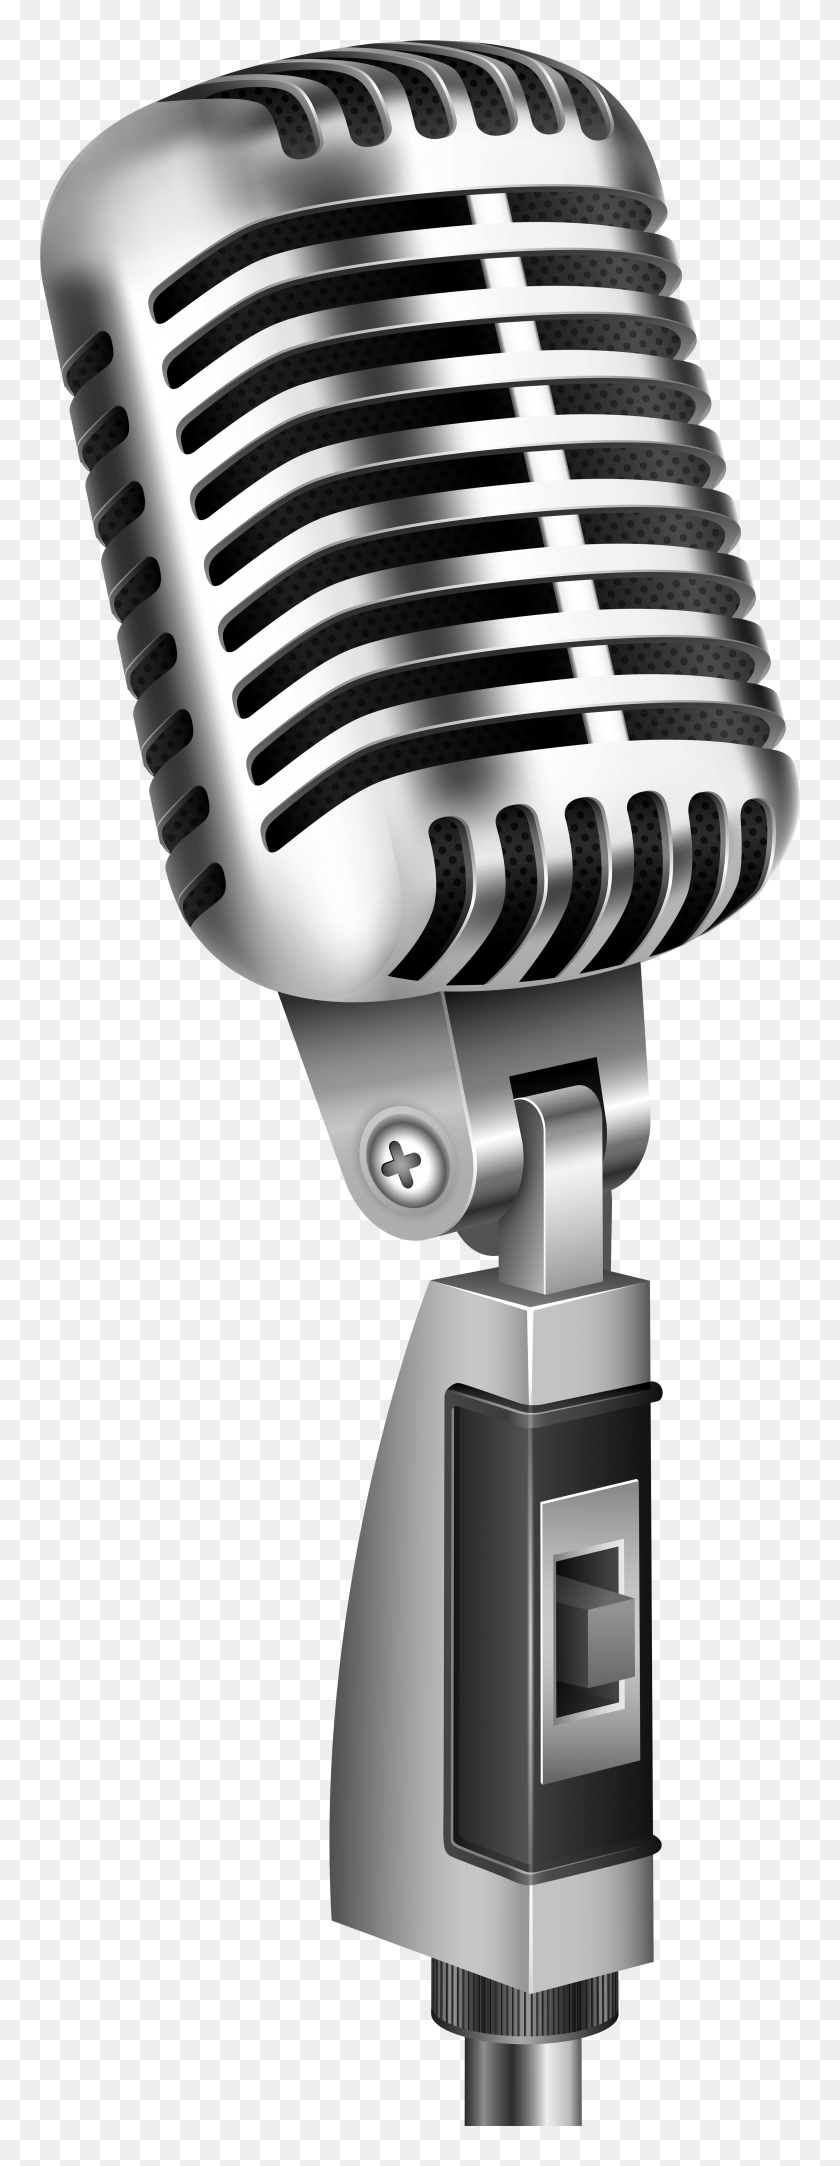 Microphone Clip Art Png - Microphone Clipart – Stunning free ...